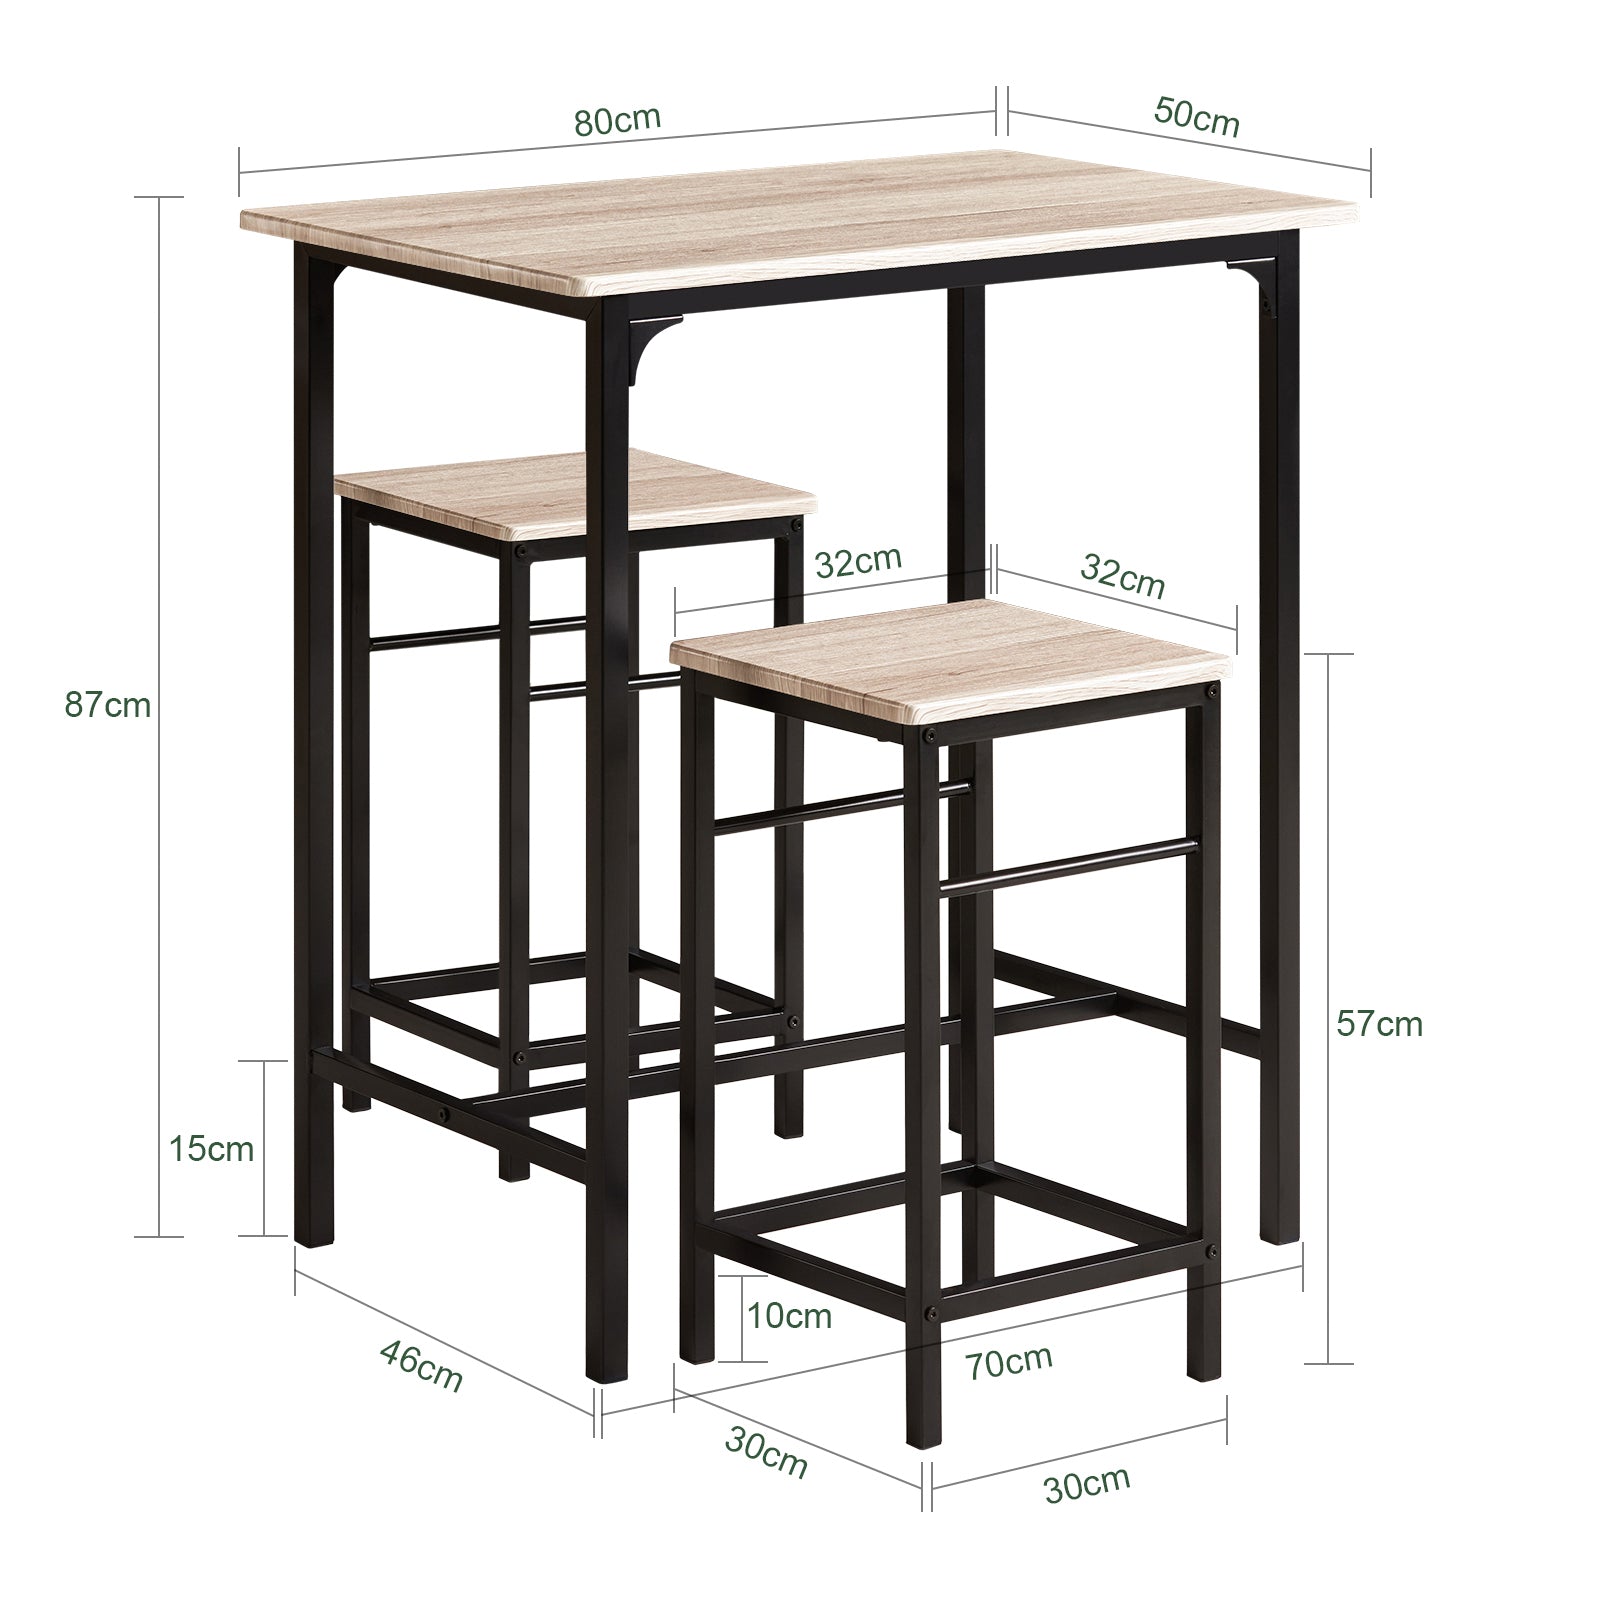 SoBuy Wood Kitchen Patio Dining Furniture,Table & Stools,OGT10-N